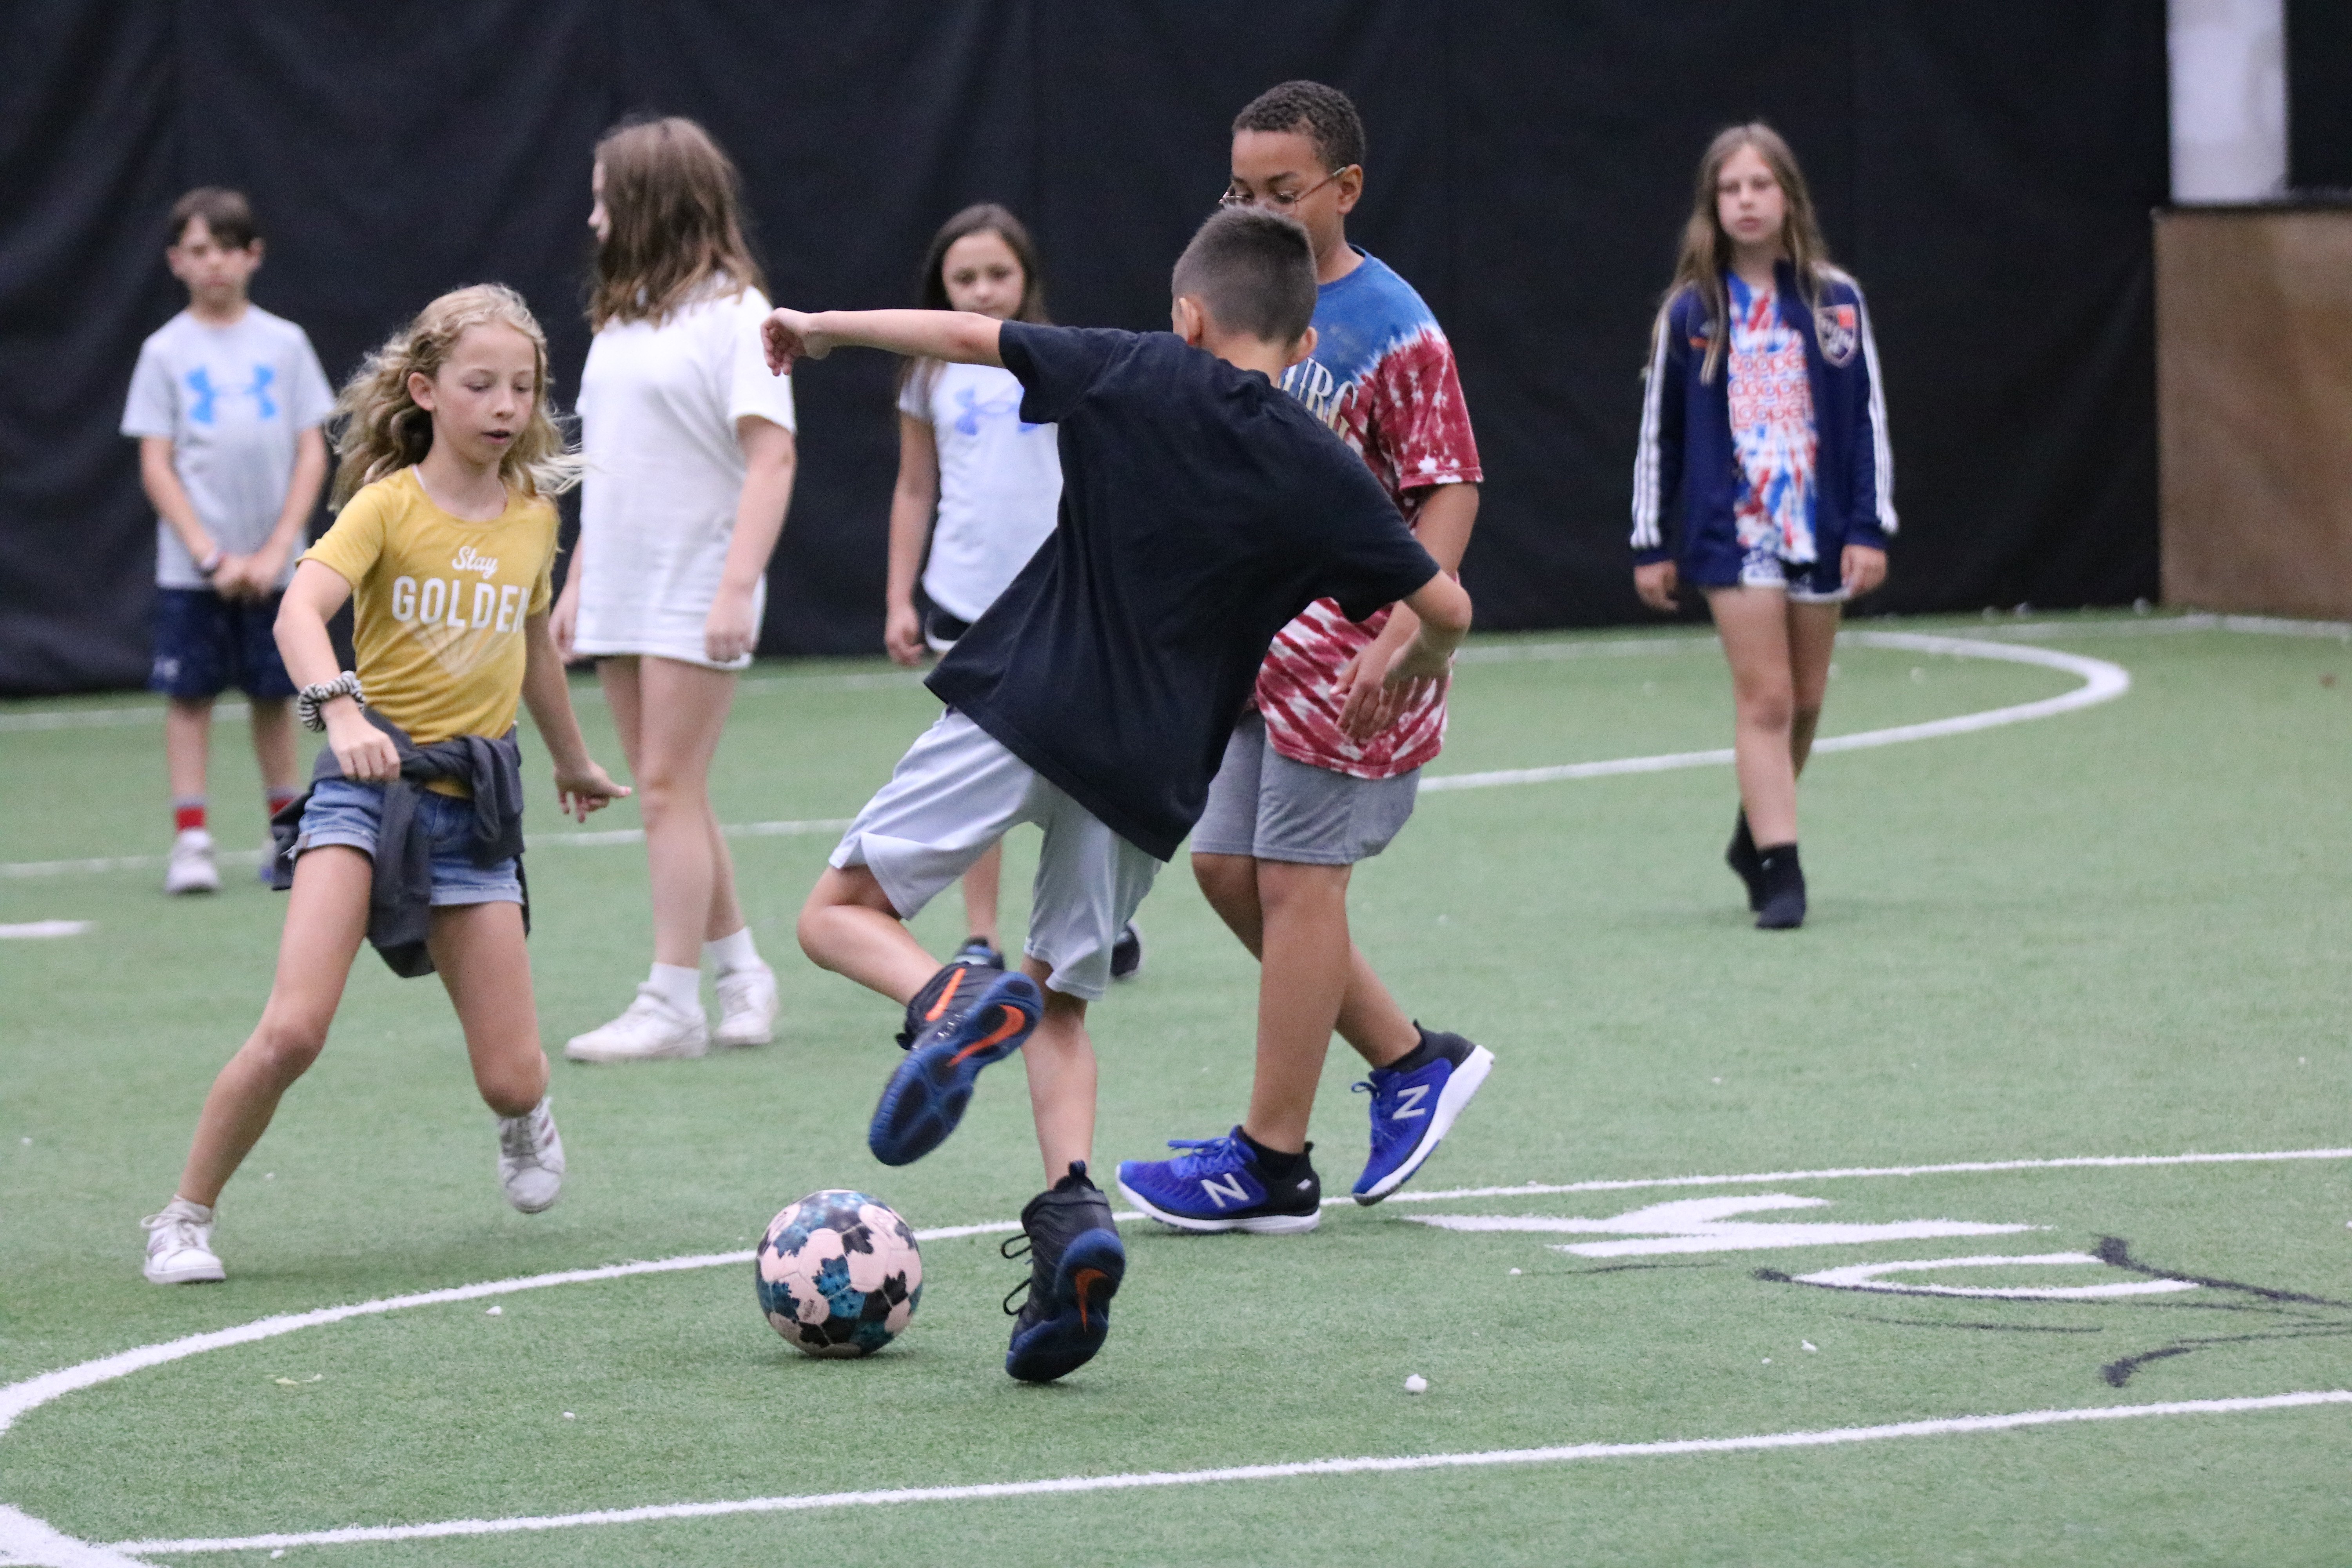 Kids running and playing soccer on a turf soccer field at a youth sports summer camp in Hamilton, Ohio